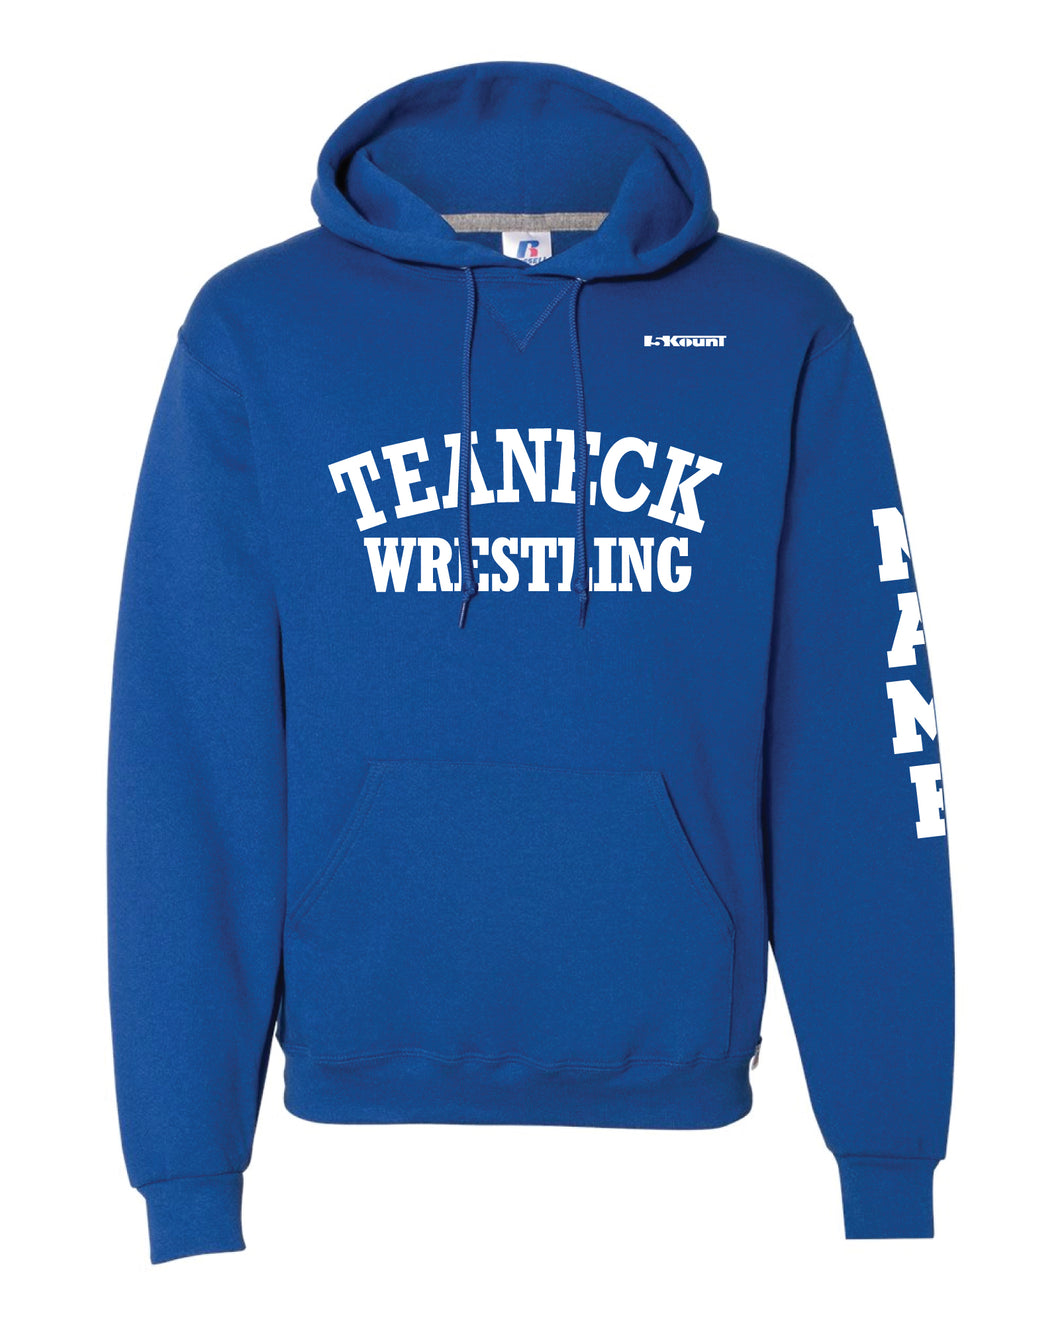 Teaneck Wrestling Russell Athletic Cotton Hoodie - Royal - 5KounT2018